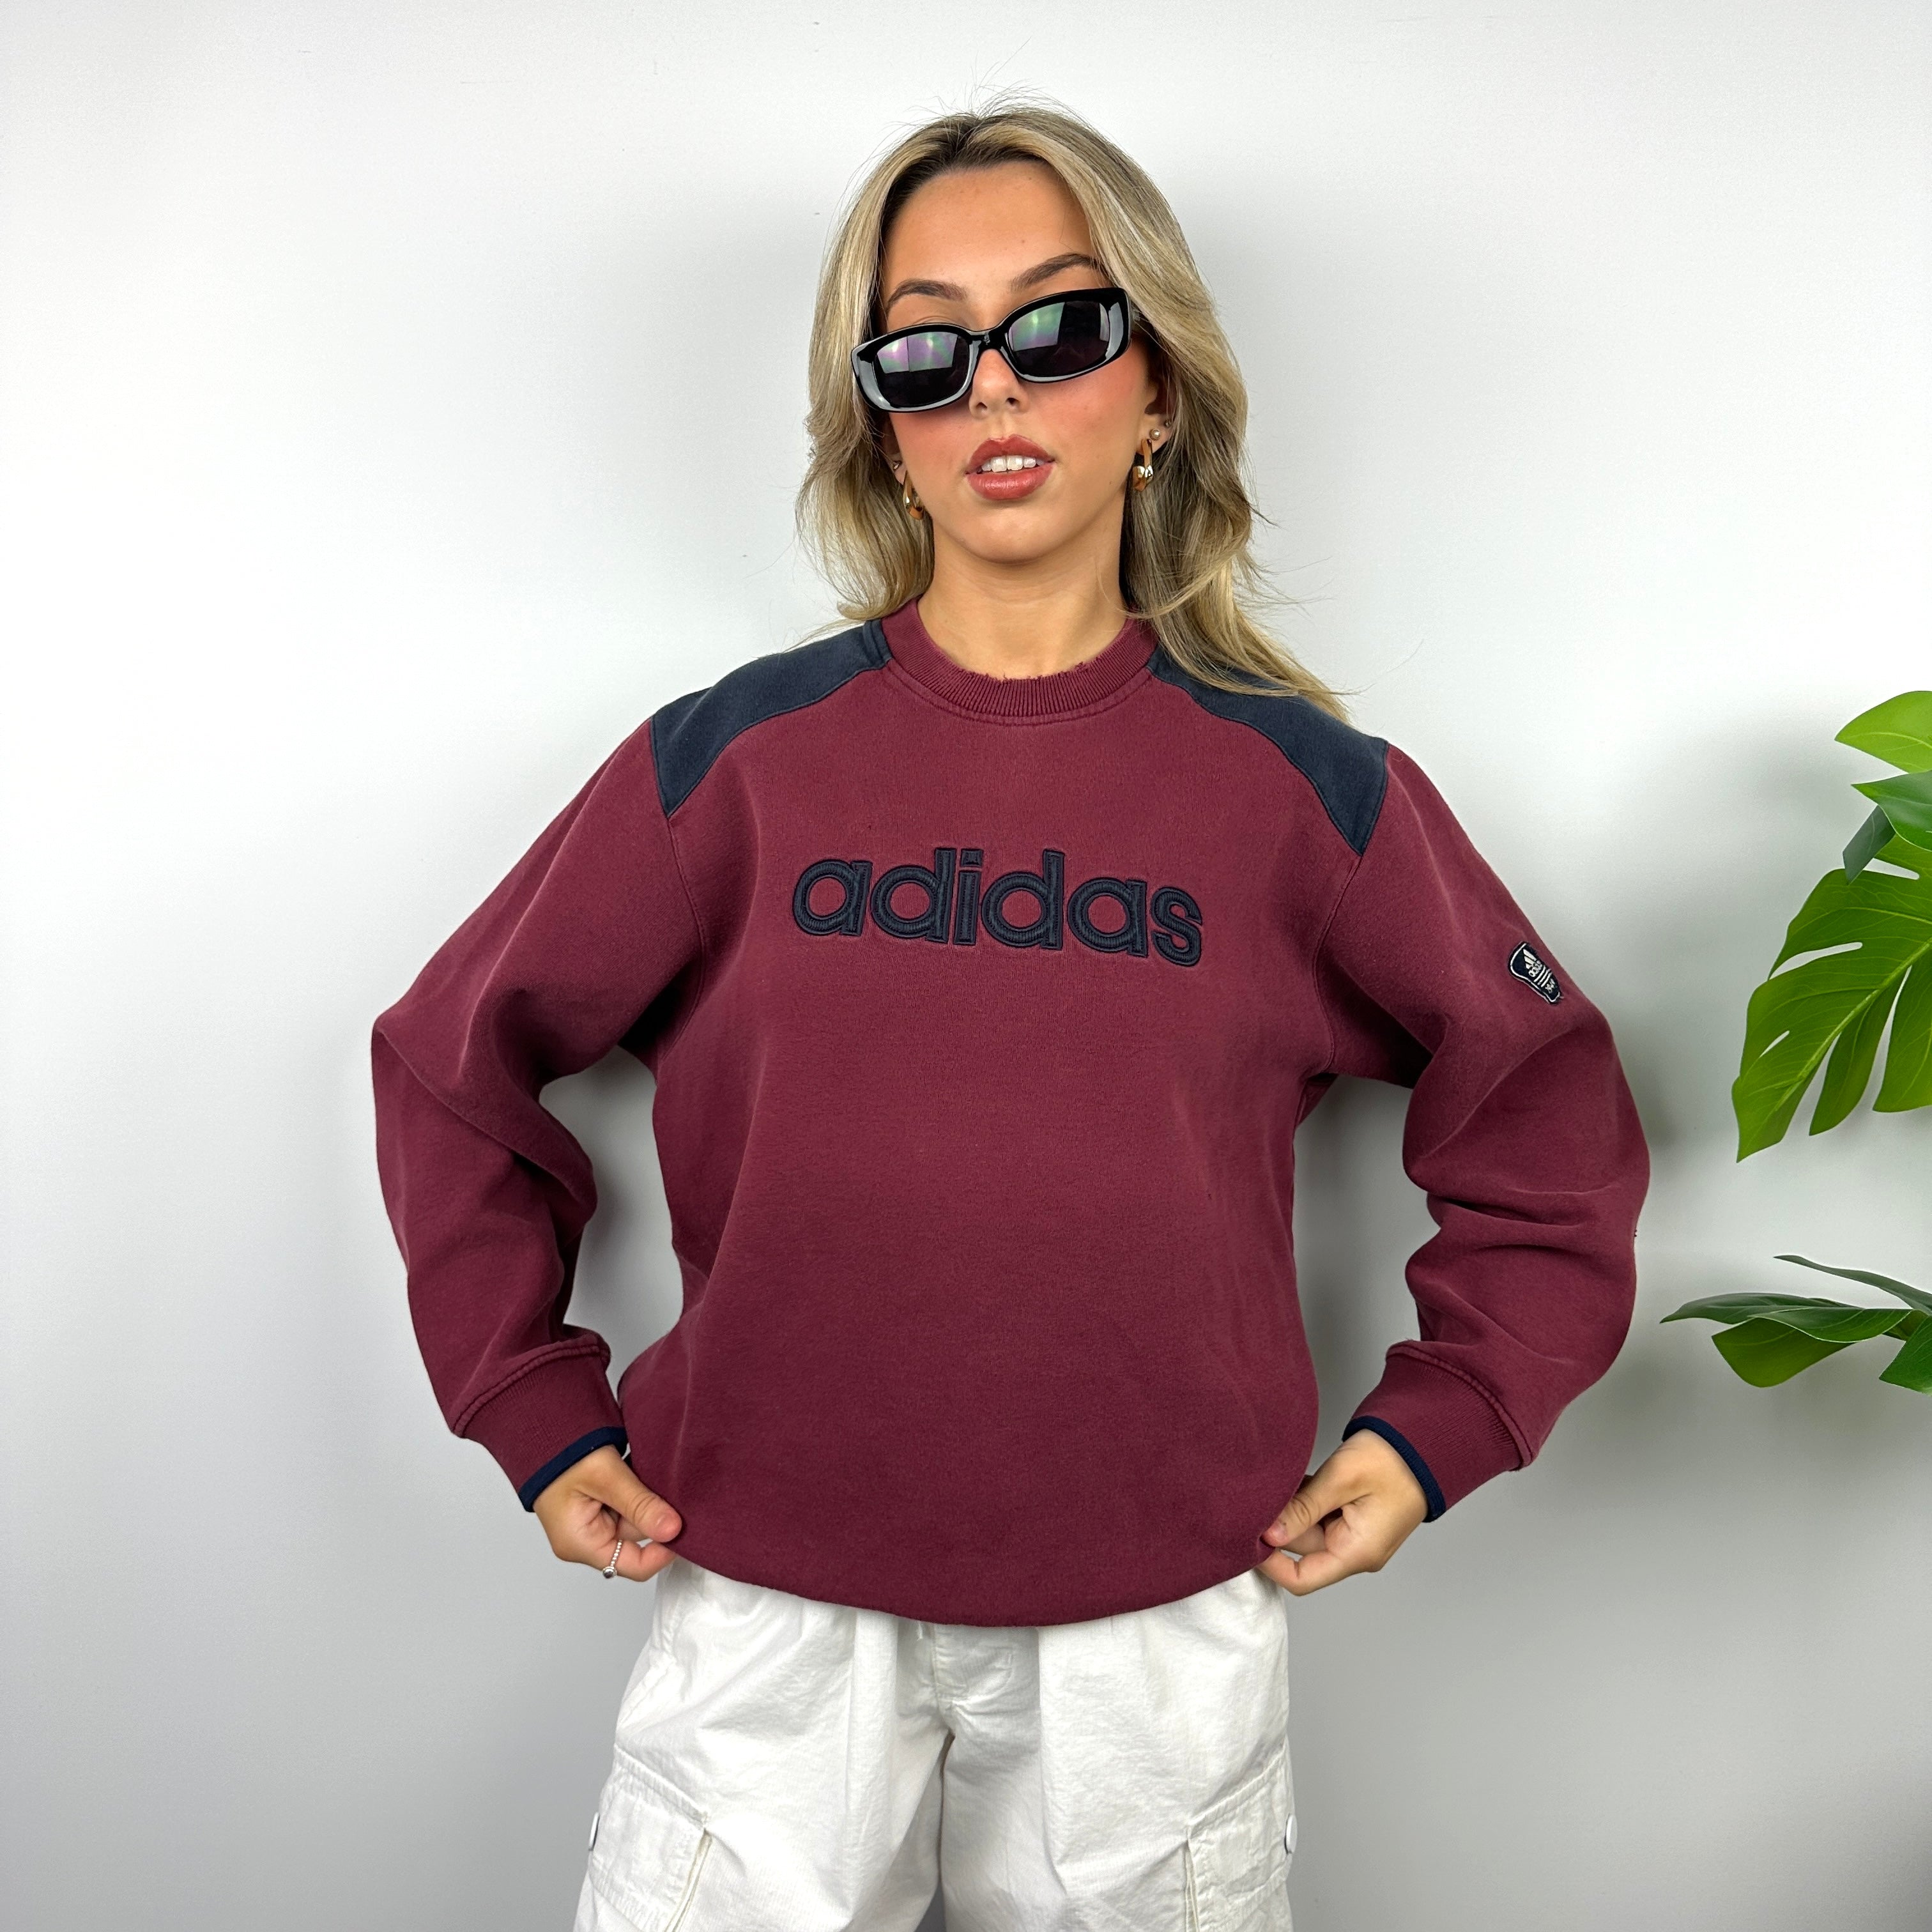 Adidas Maroon Embroidered Spell Out Sweatshirt (M)